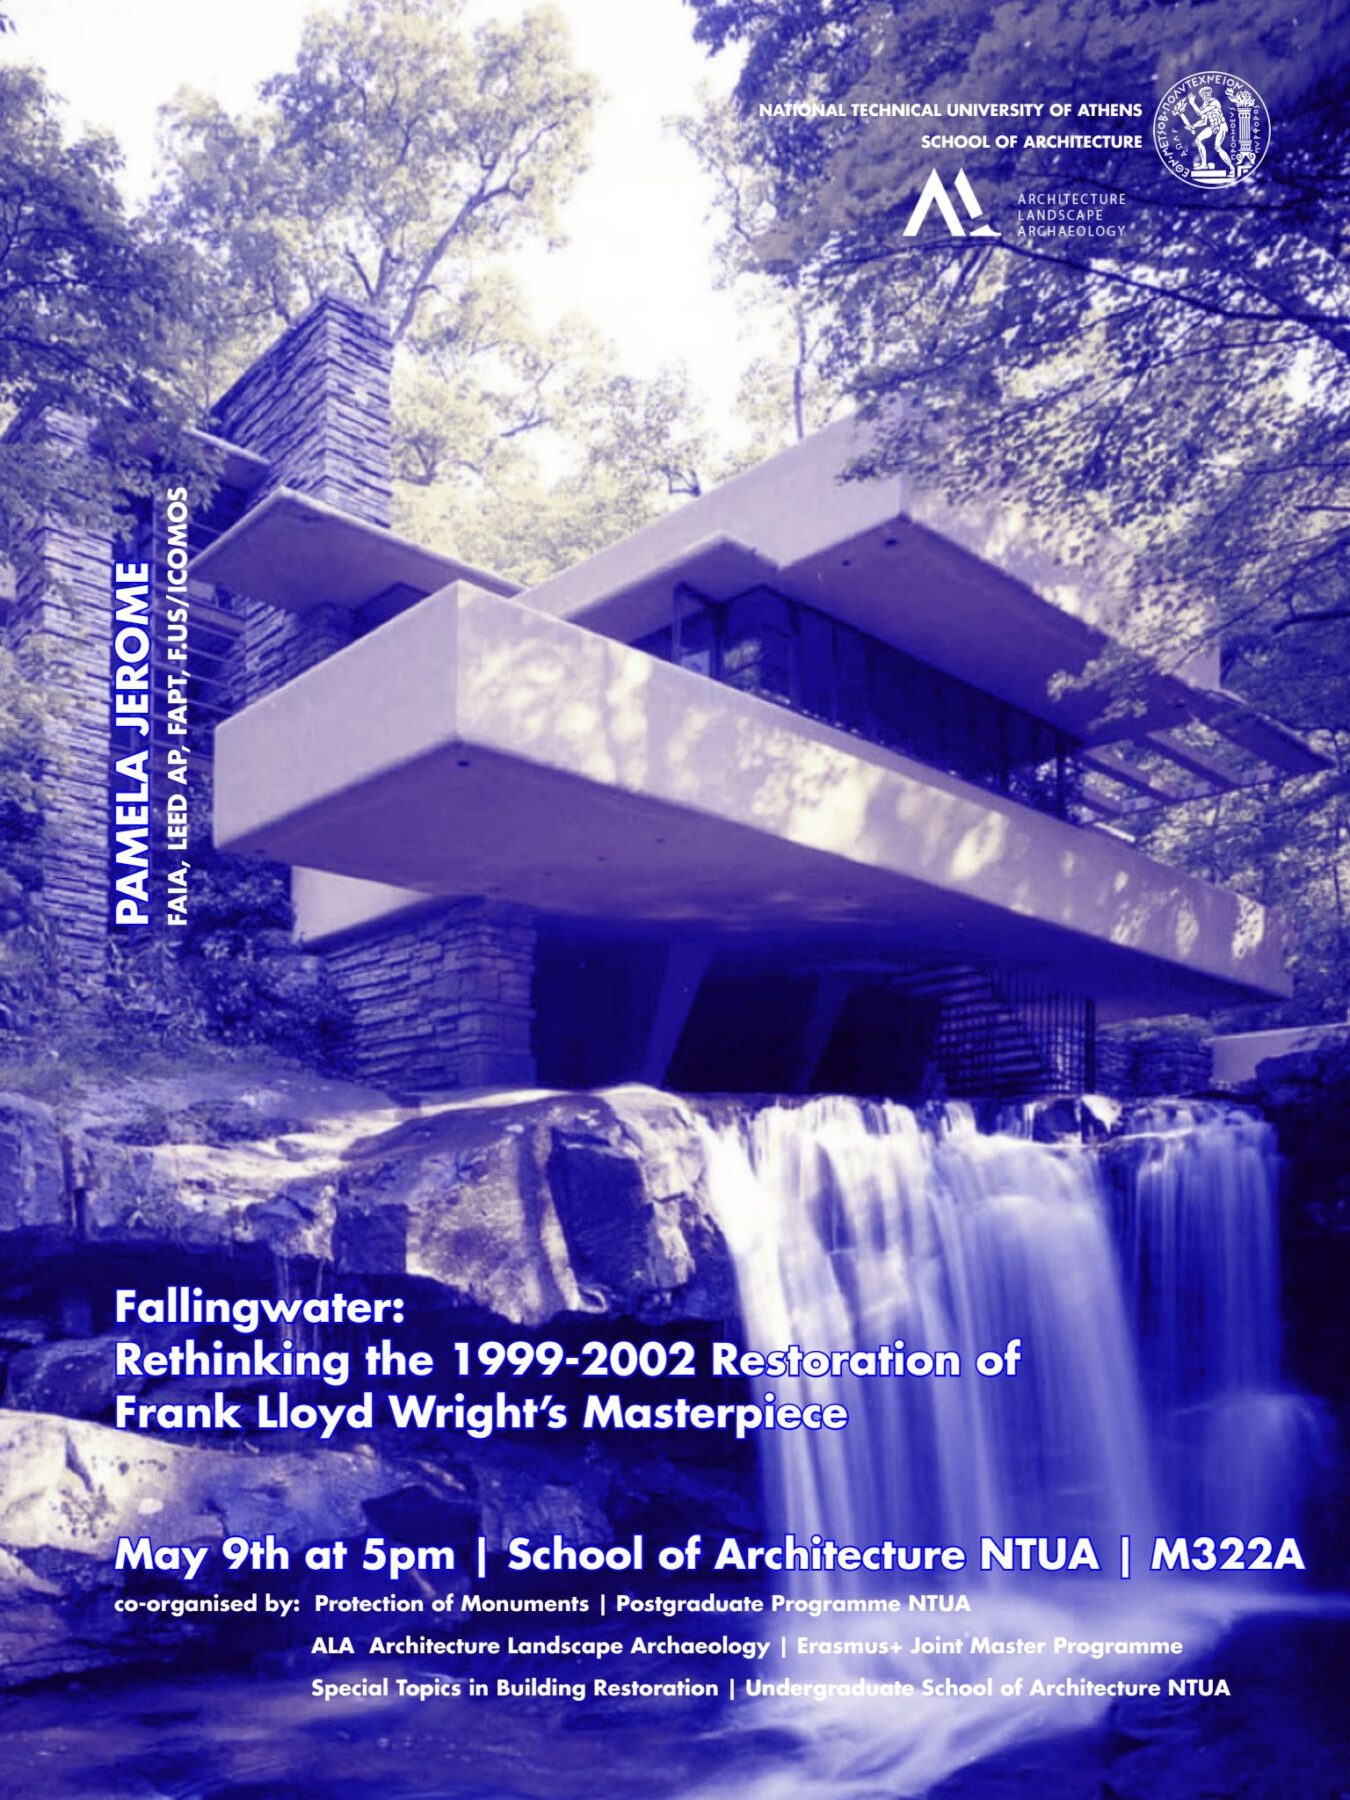 Archisearch Fallingwater: Rethinking the 1999-2002 Restoration of Frank Lloyd Wright’s Masterpiece | Lecture by Pamela Jerome, NTUA